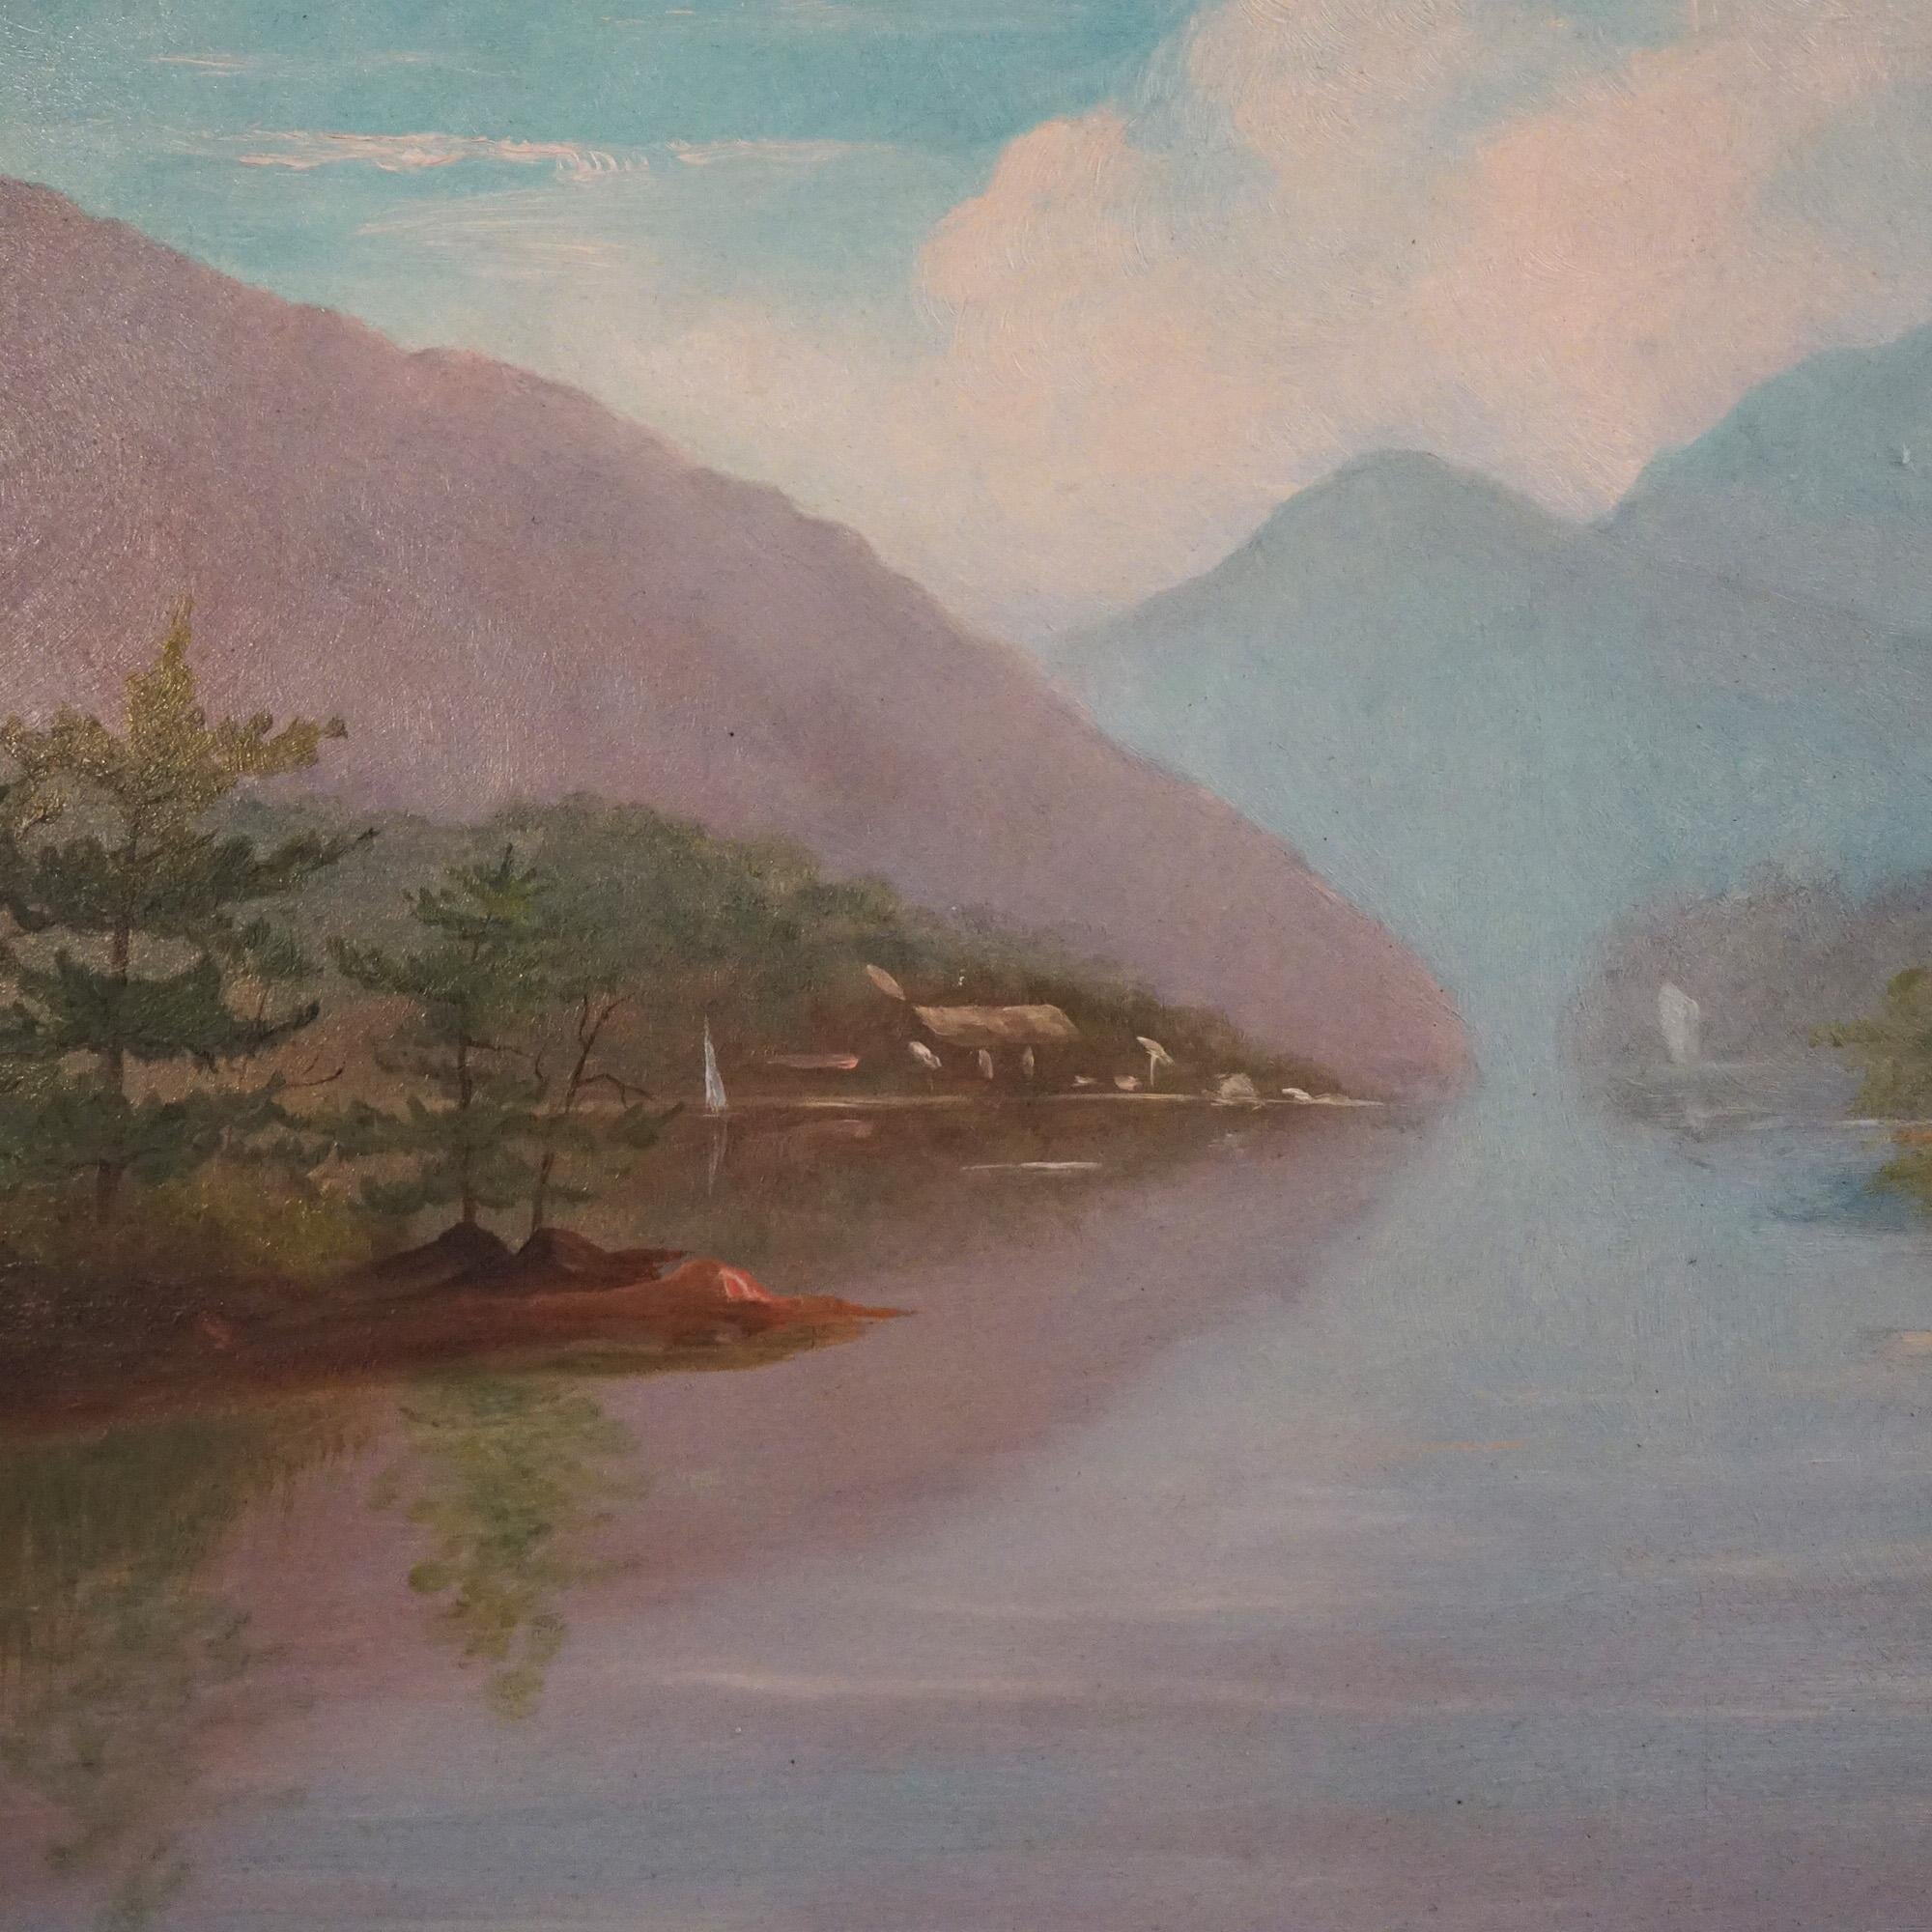 Antique Oil on Canvas Landscape Painting of a Mountain Lake Seated in Giltwood Frame, C1890

Measures- 24.25''H x 31.5''W x 3''D; 24'' x 17.5'' sight